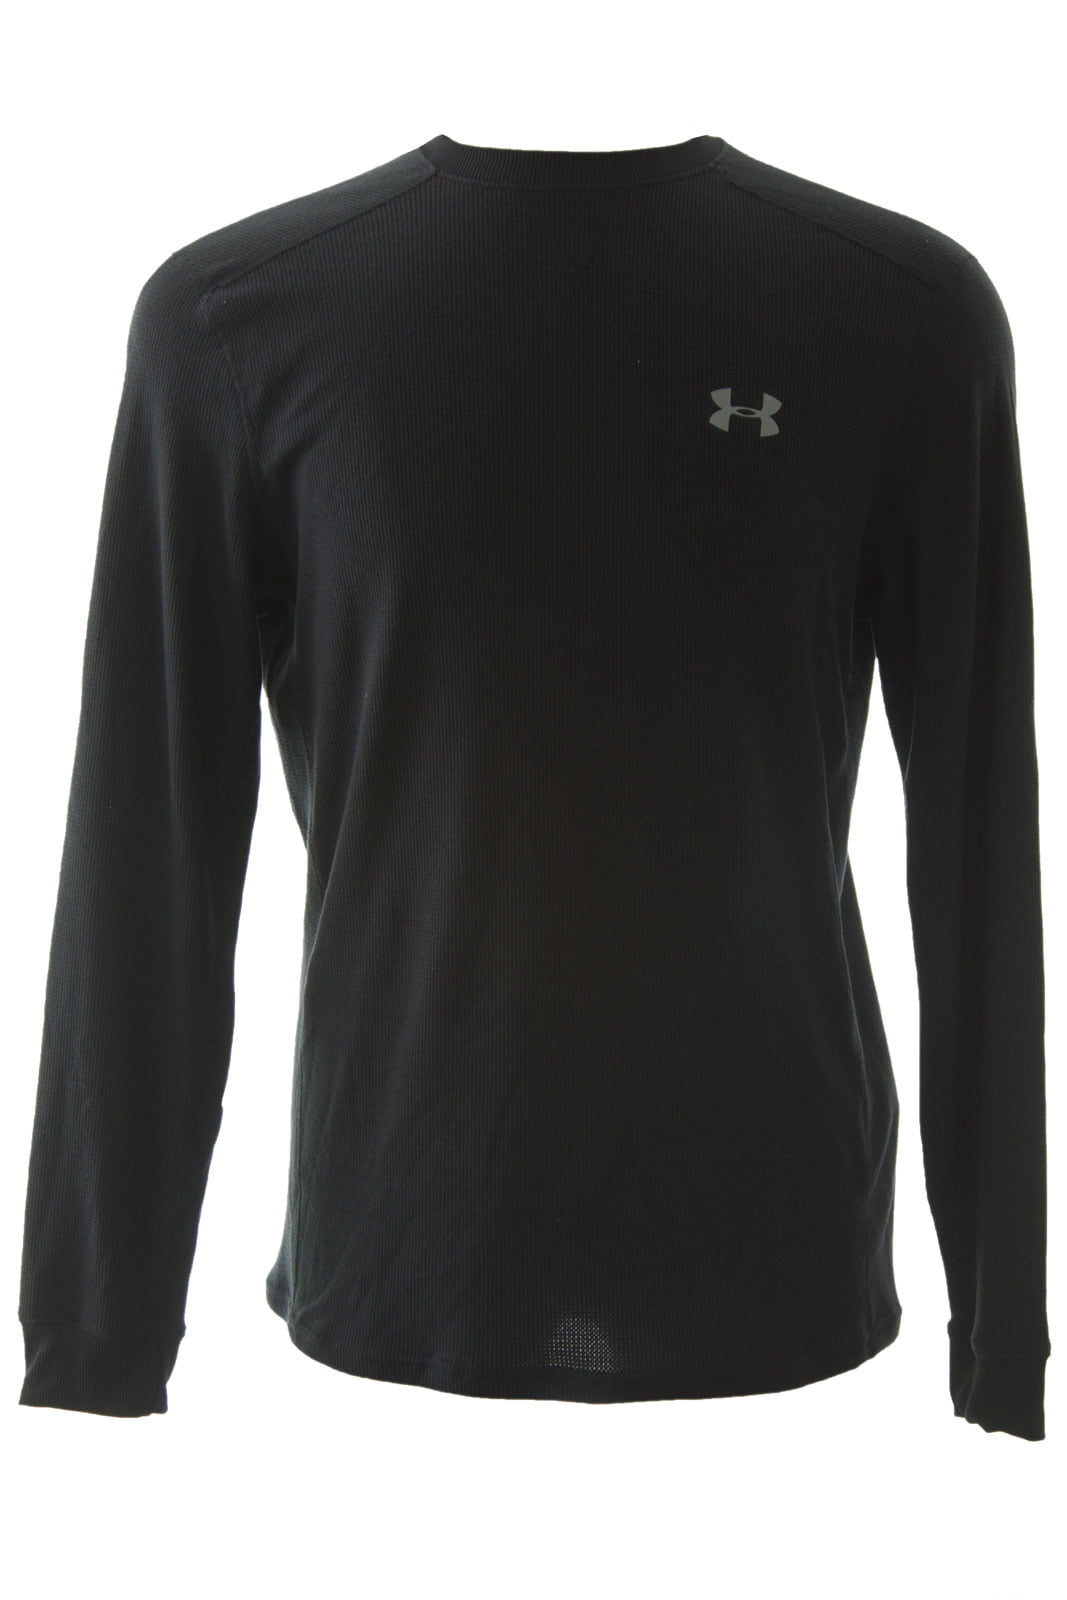 Under Armour Men's Amplify Thermal Long Sleeve Shirt 